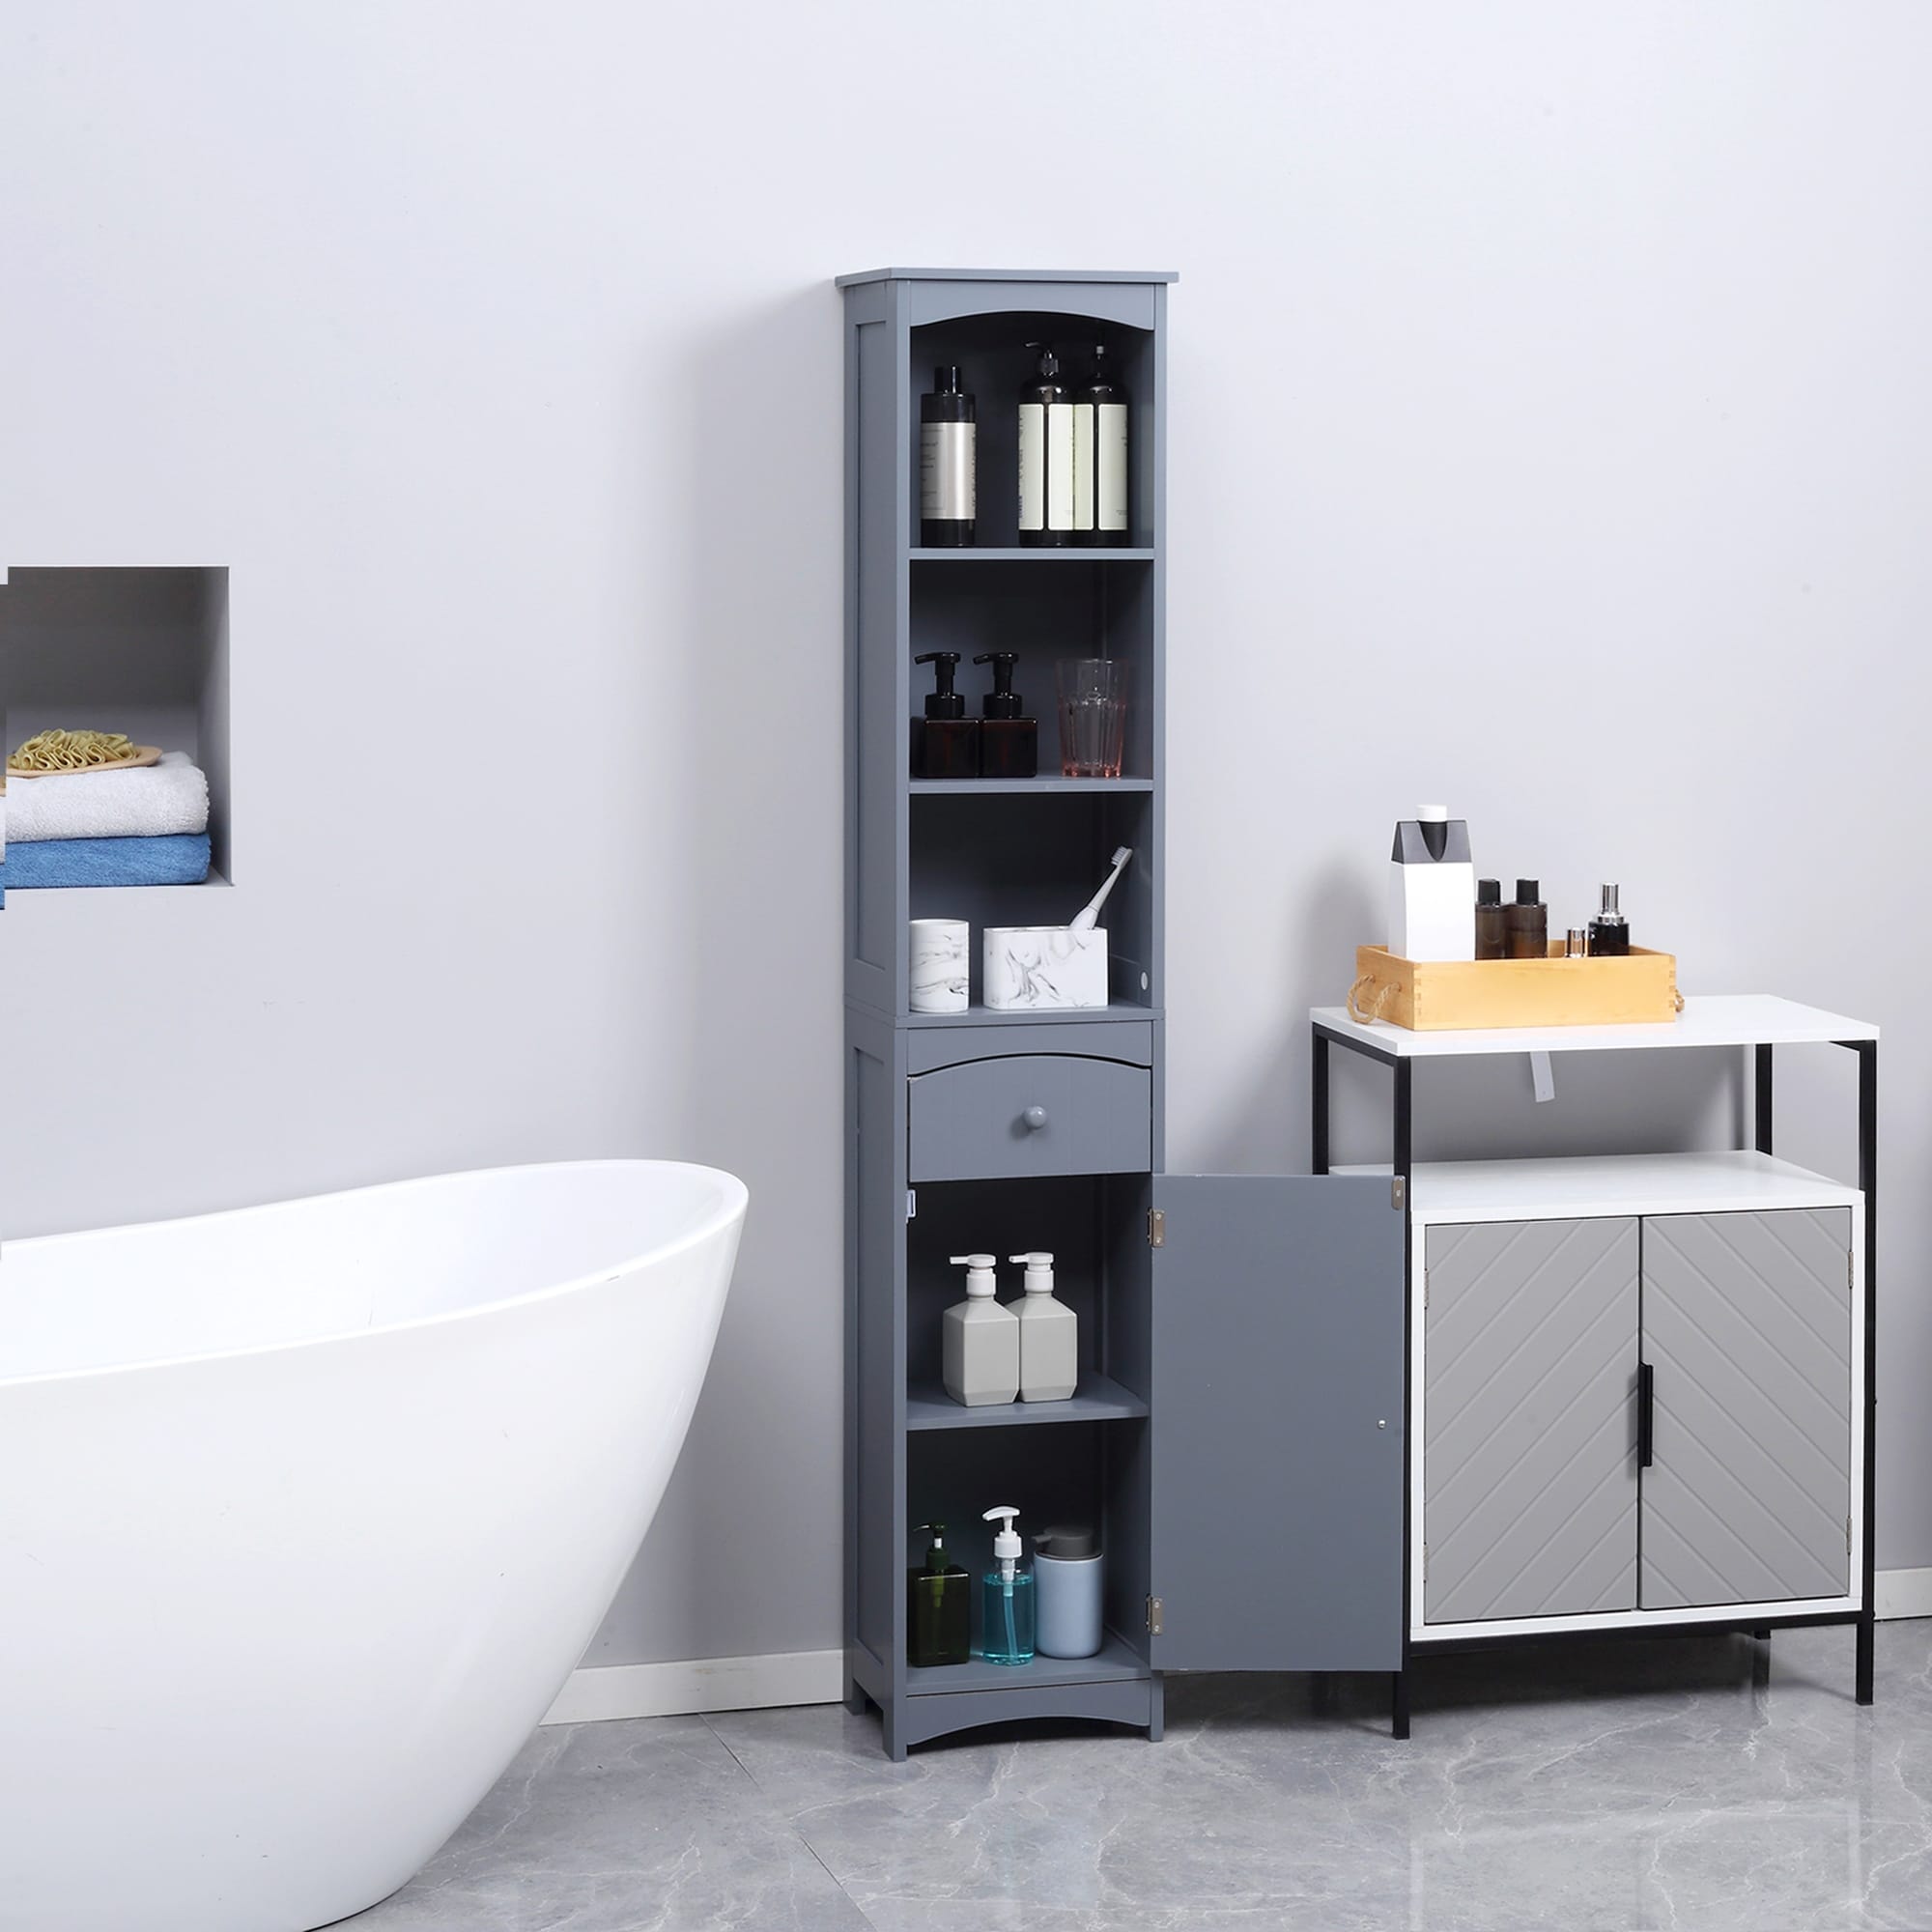 https://ak1.ostkcdn.com/images/products/is/images/direct/32e290015b821f42bc2808224fee32f6346acb7a/HOMCOM-Bathroom-Storage-Cabinet%2C-Free-Standing-Bath-Storage-Unit%2C-Tall-Linen-Tower-with-3-Tier-Shelves-and-Drawer%2C-Brown.jpg